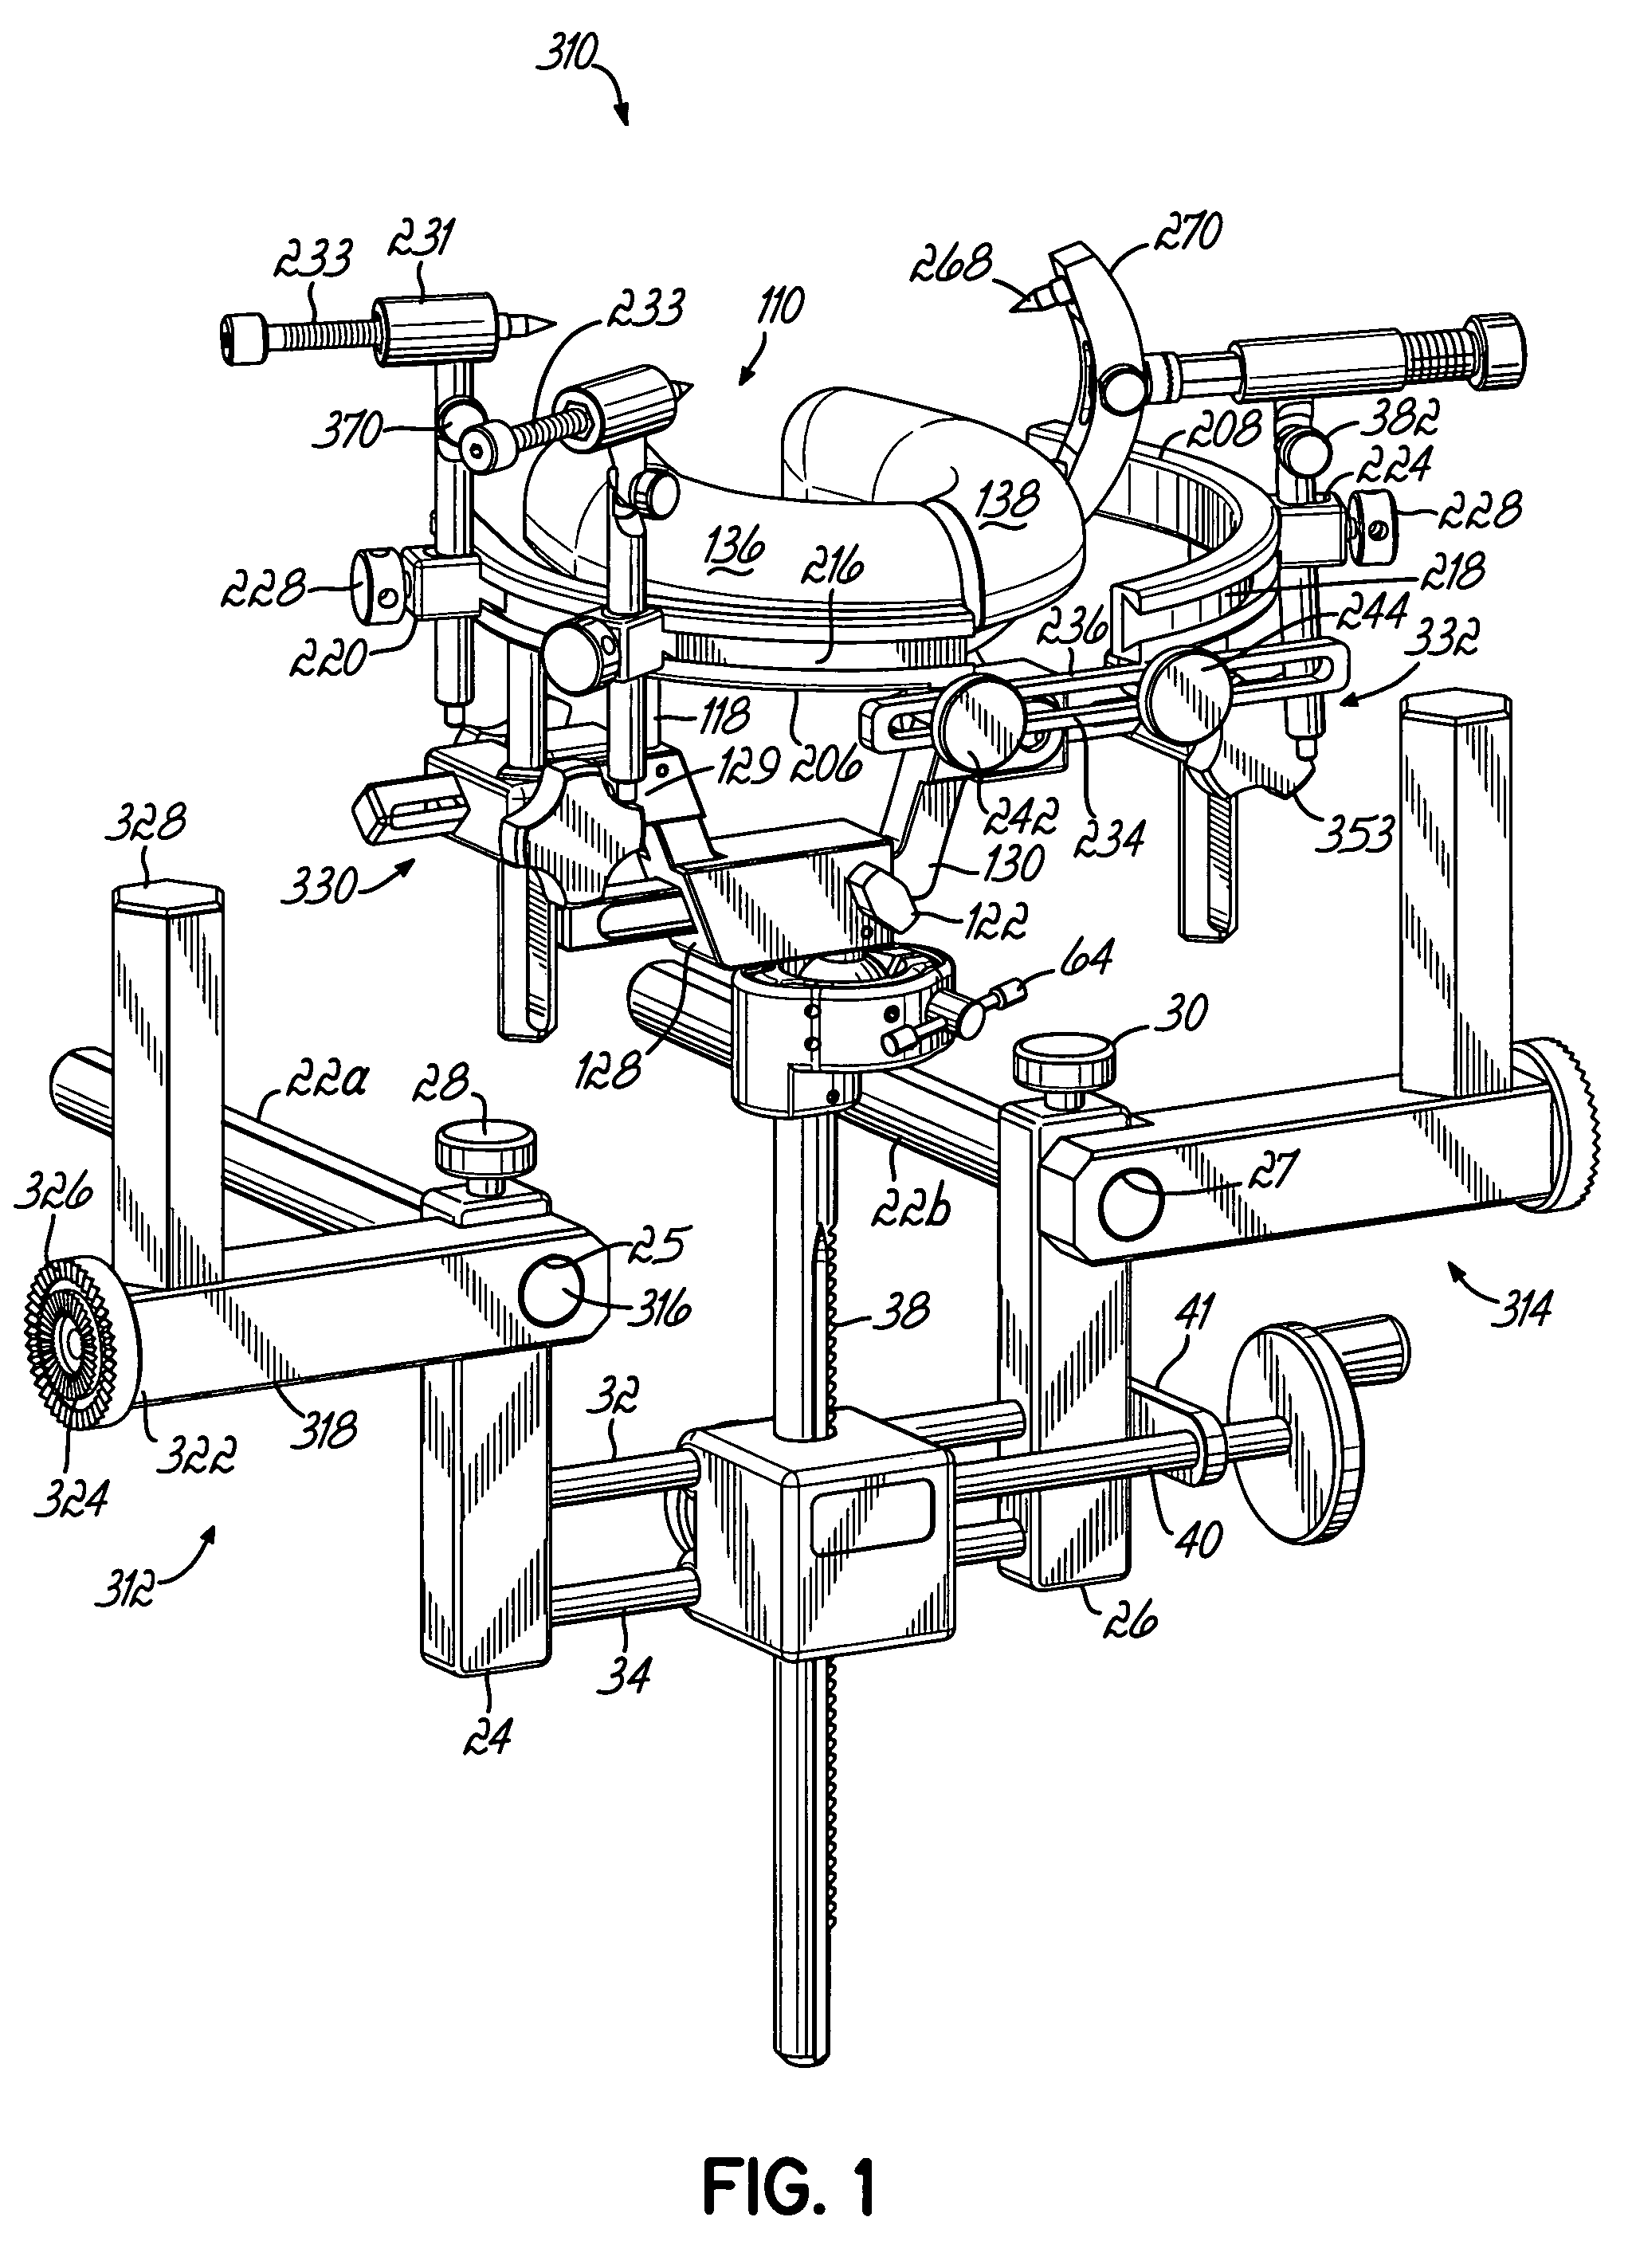 Head support and stabilization system